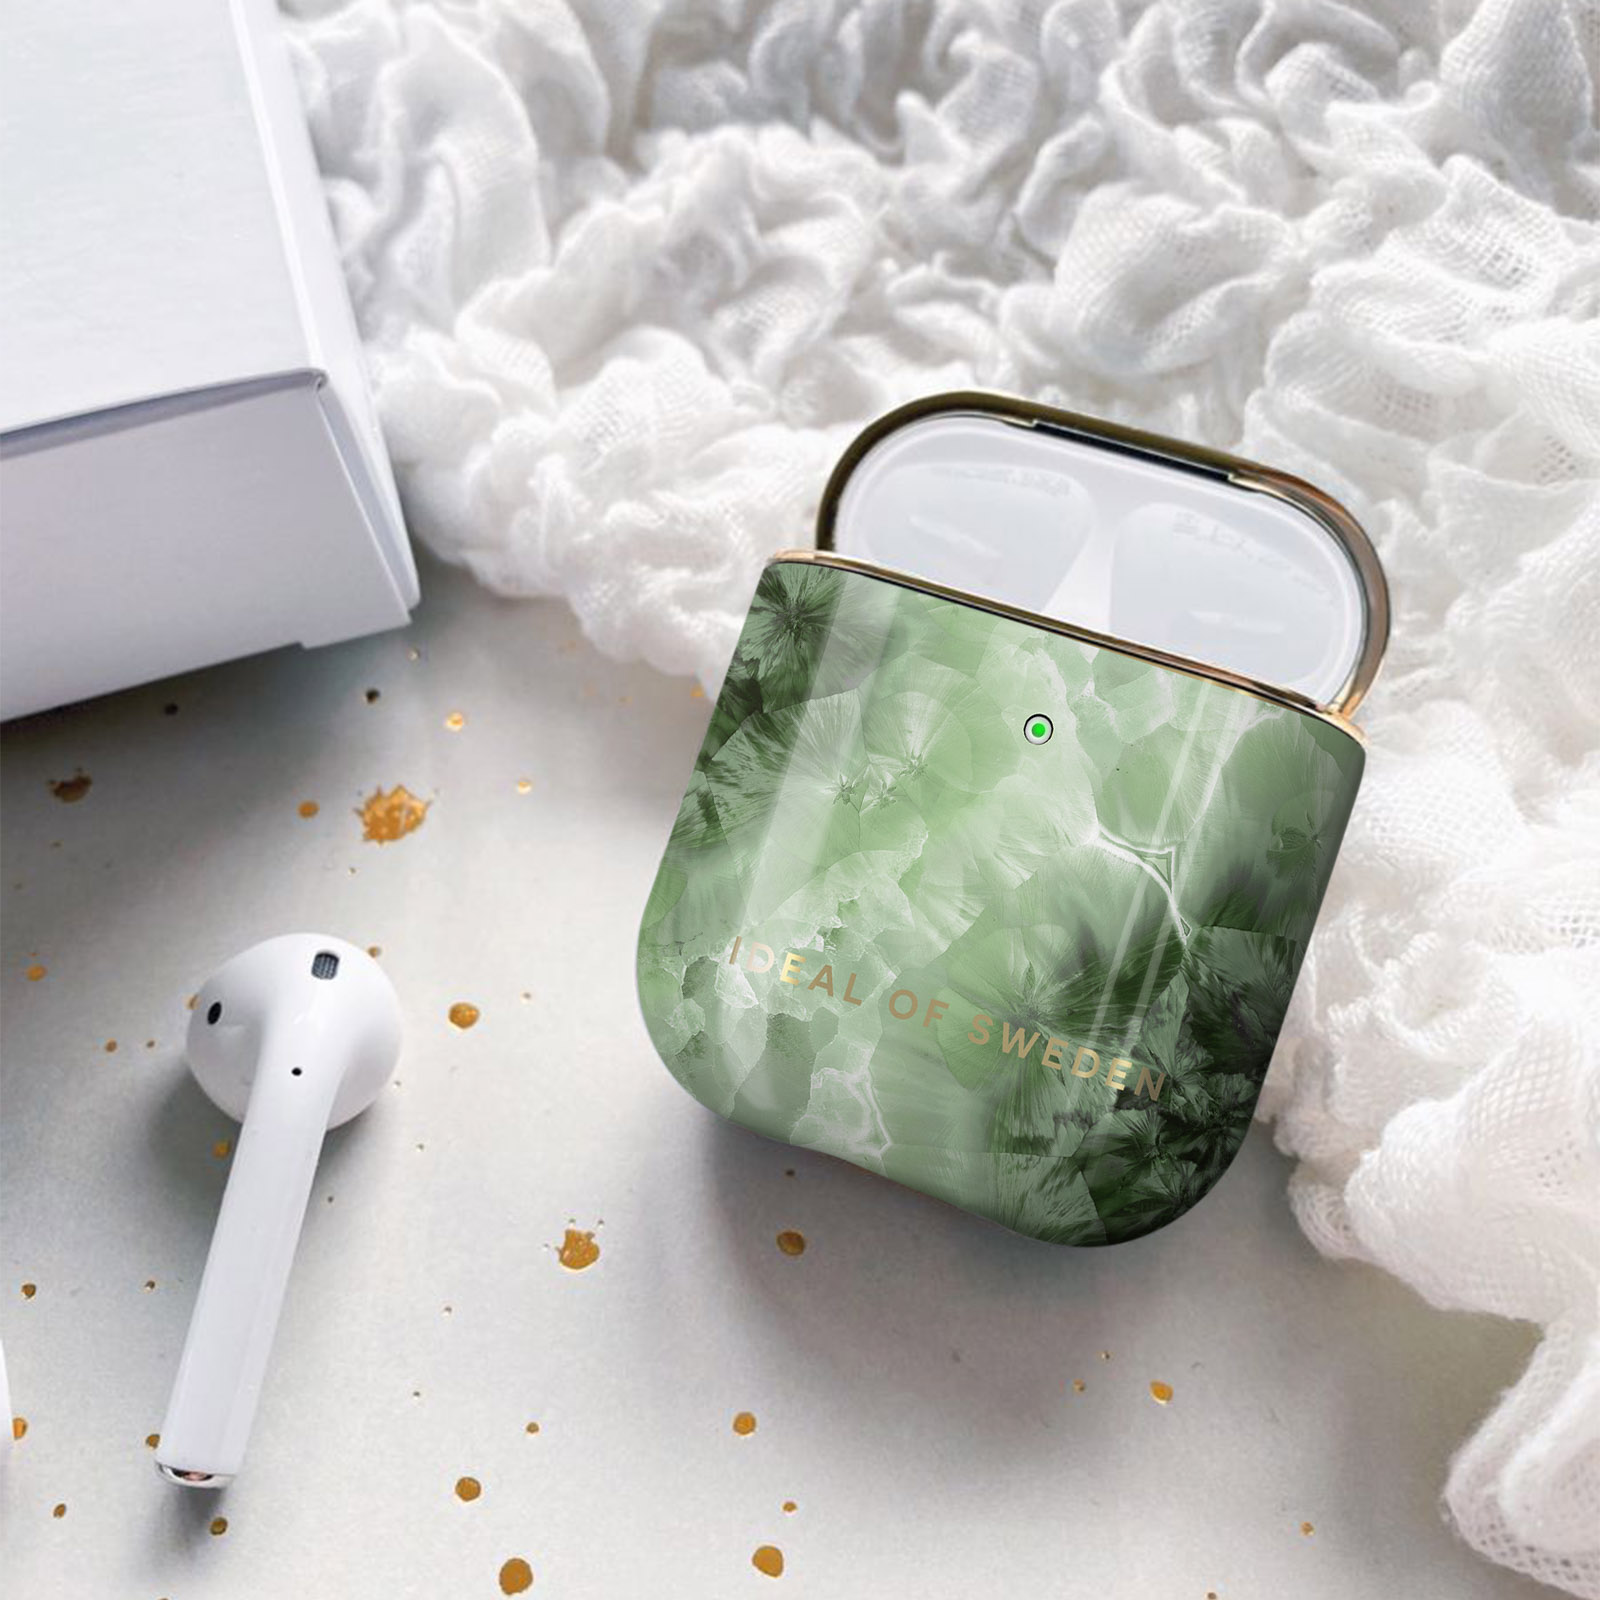 IDEAL OF SWEDEN IDFAPC-230 Green passend Sky Full für: Apple AirPod Crystal Case Cover